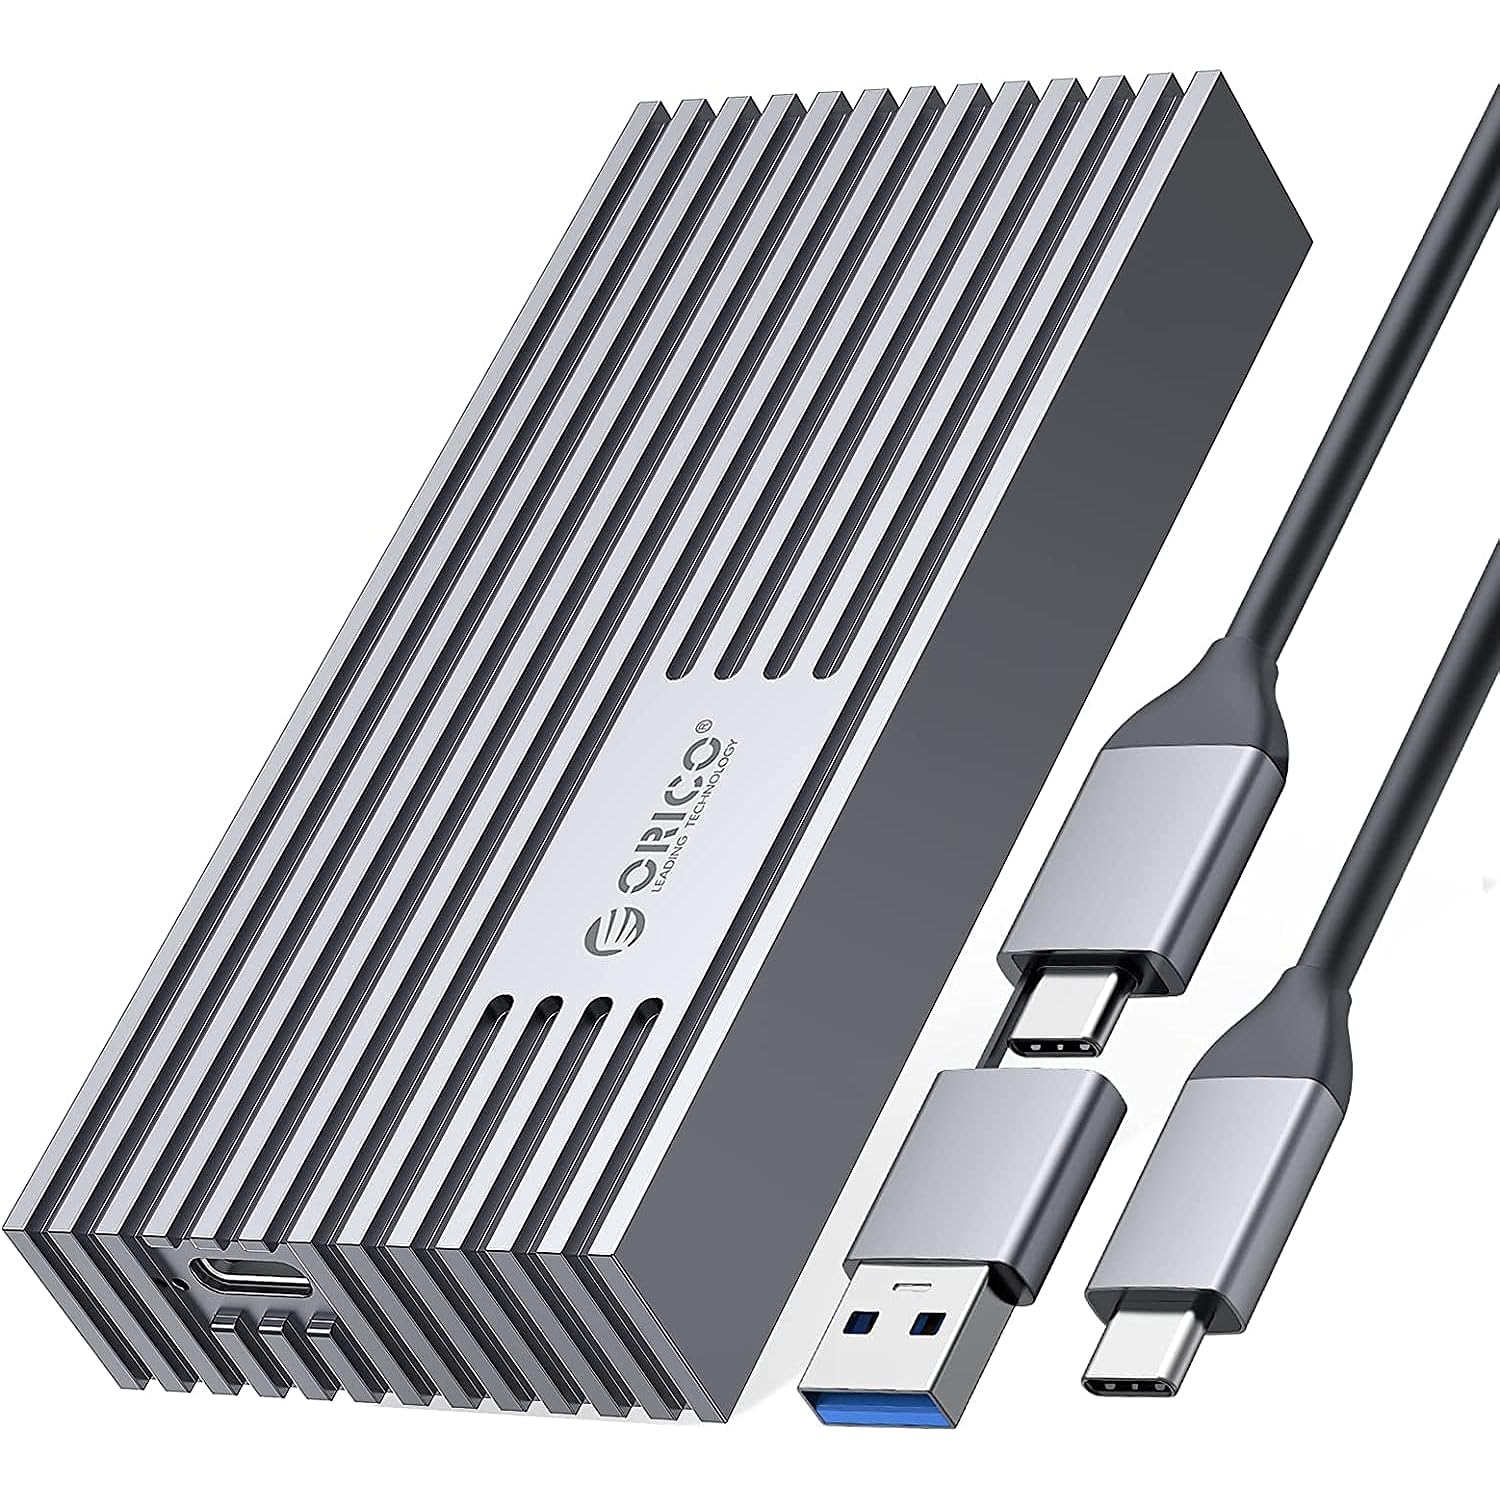 GCP Products GCP-65480863 40Gbps Nvme Ssd Enclosure M.2 To Usb-C